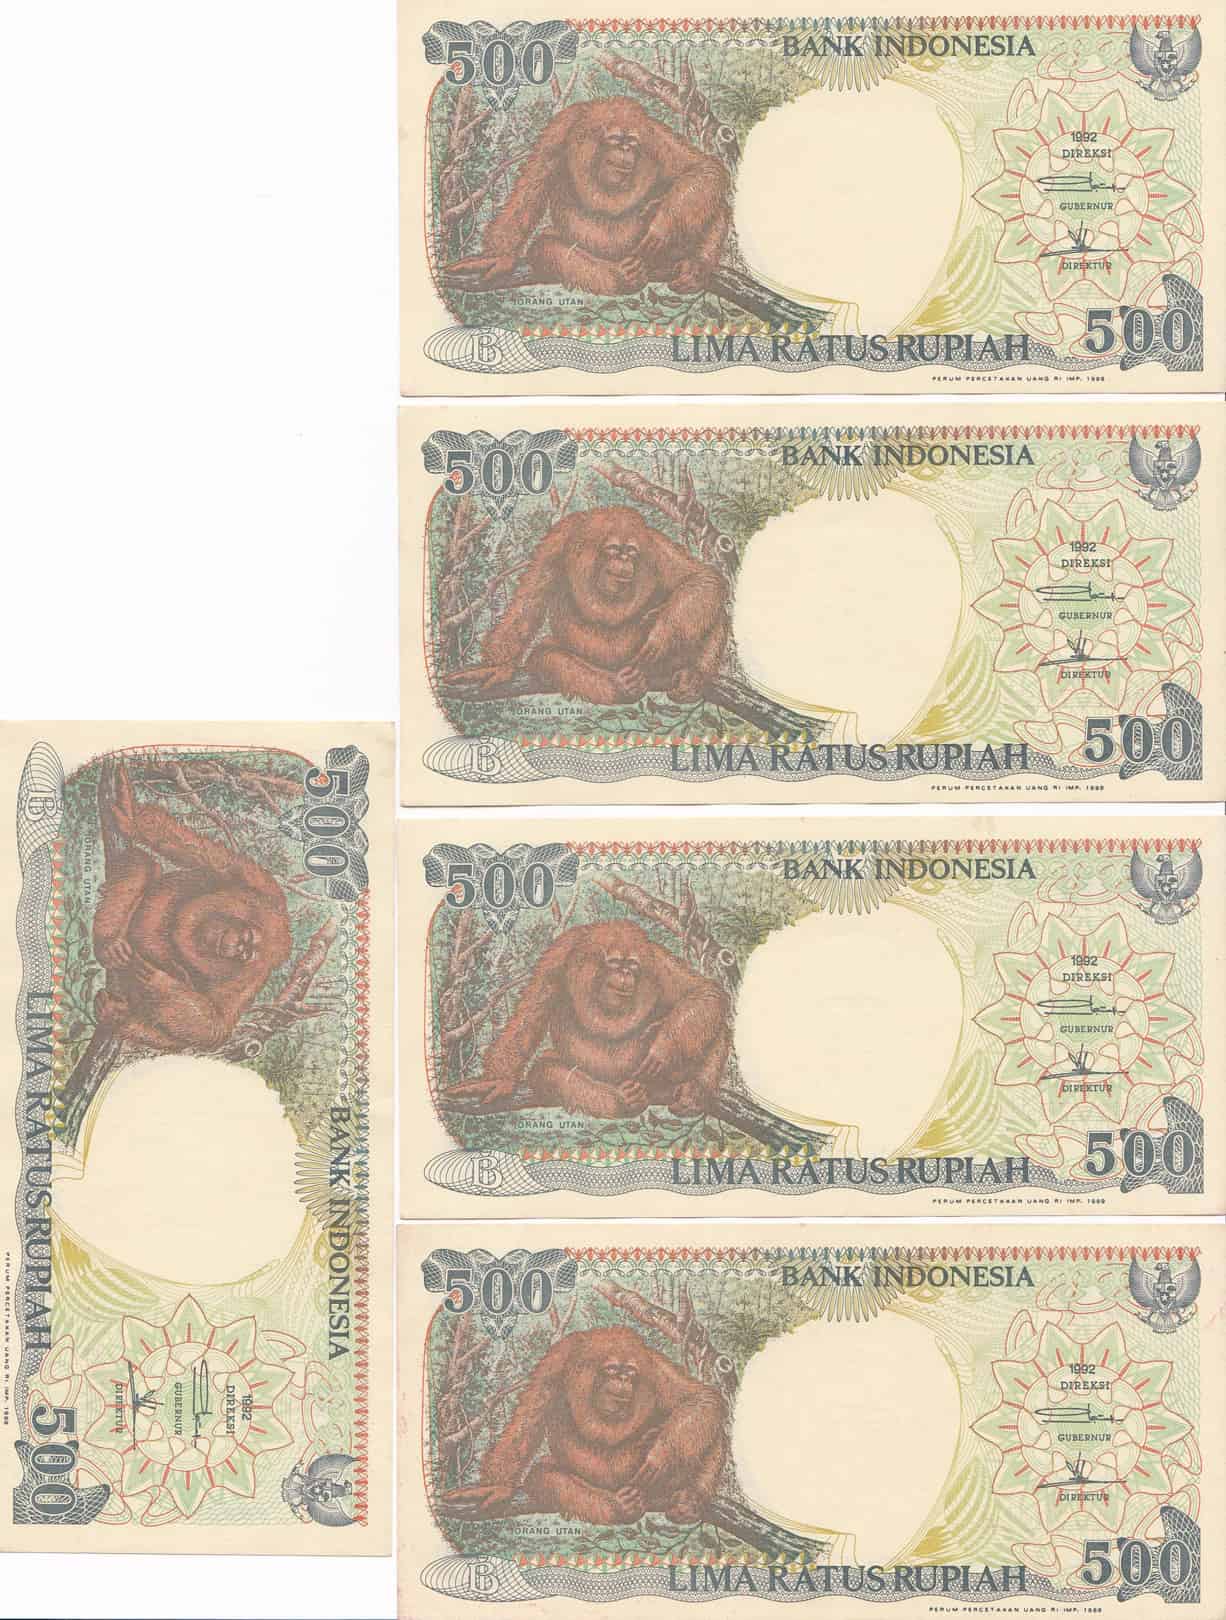 5x Indonesian Rupiah IDR 500 1992 Banknotes Paper Money - UNC - Running Serial Number